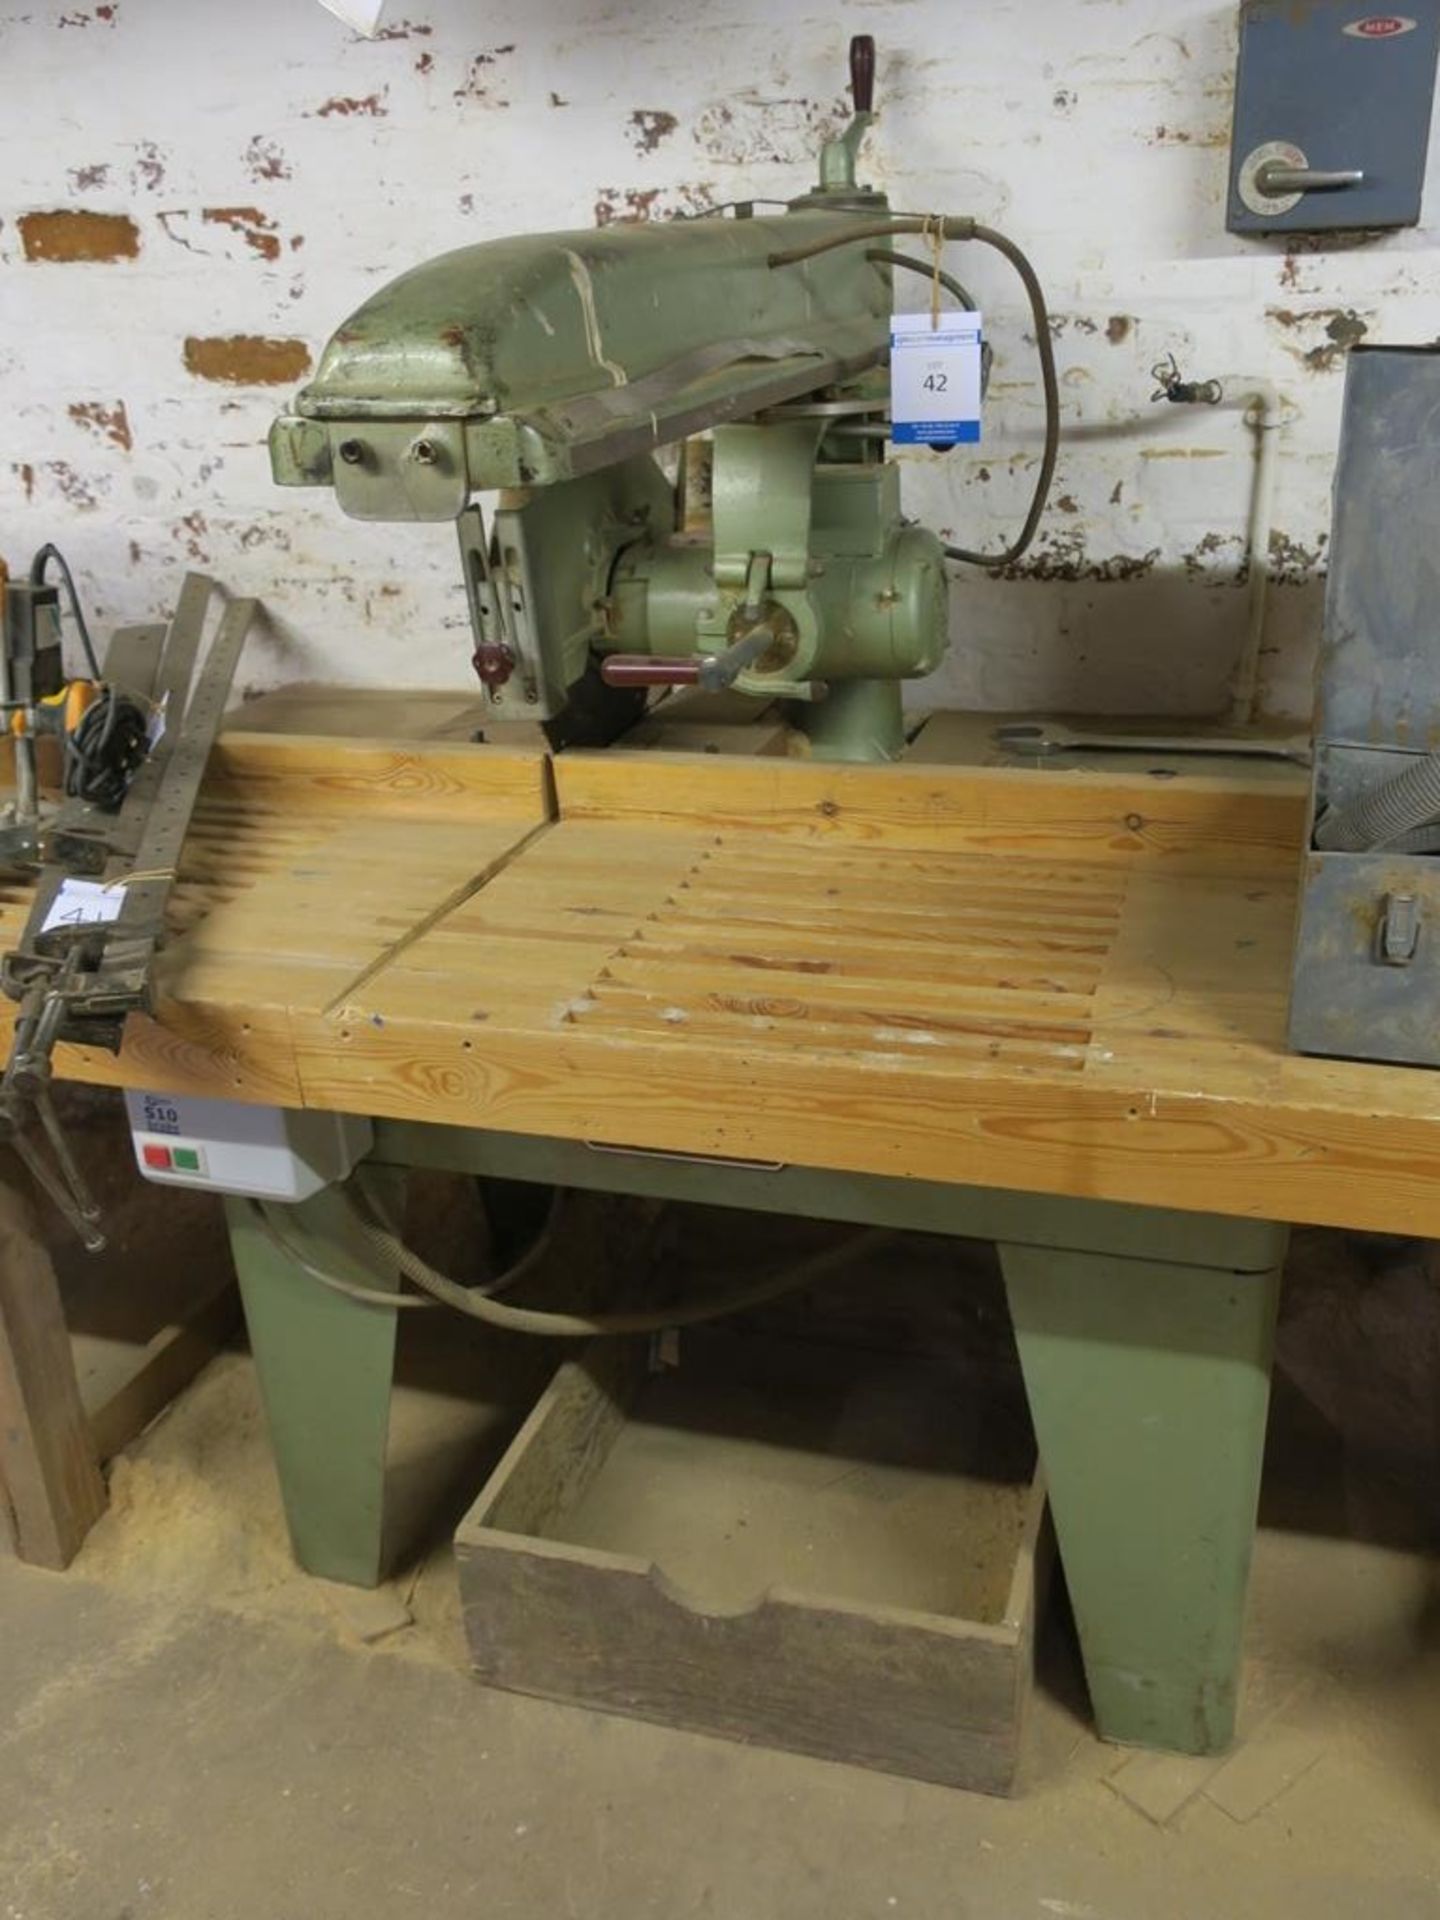 * Wadkin BRA 74664 Cross Cut Saw, 3PH, 415V and Wooden Table, approx 6800mm Long. Please note this